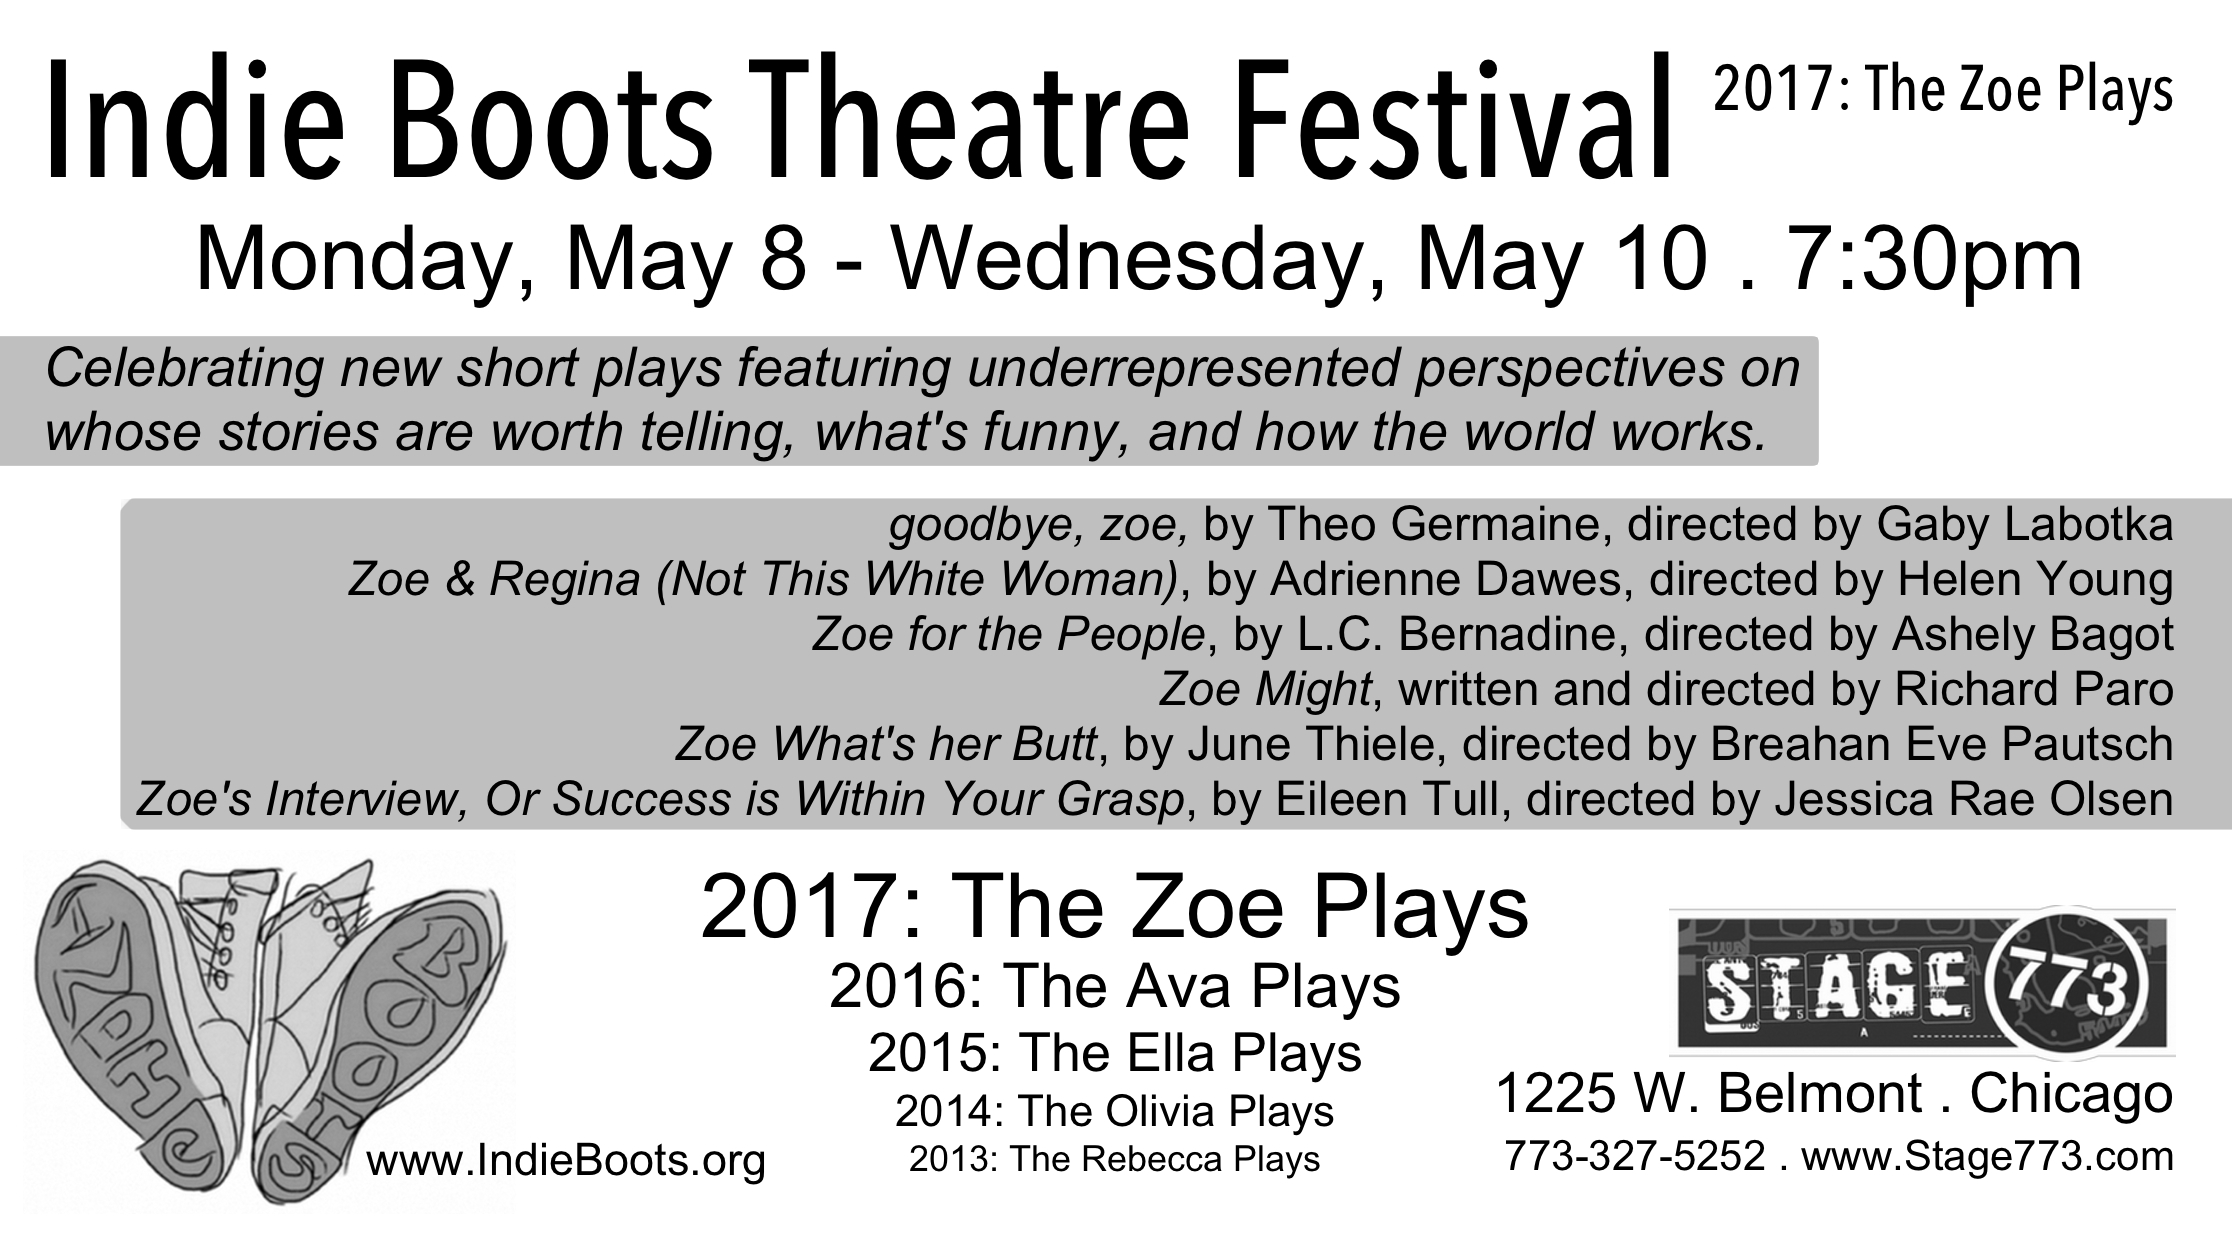 Indie Boots Theatre Festival 2017: The Zoe Plays postcard listing plays, writers, and directors